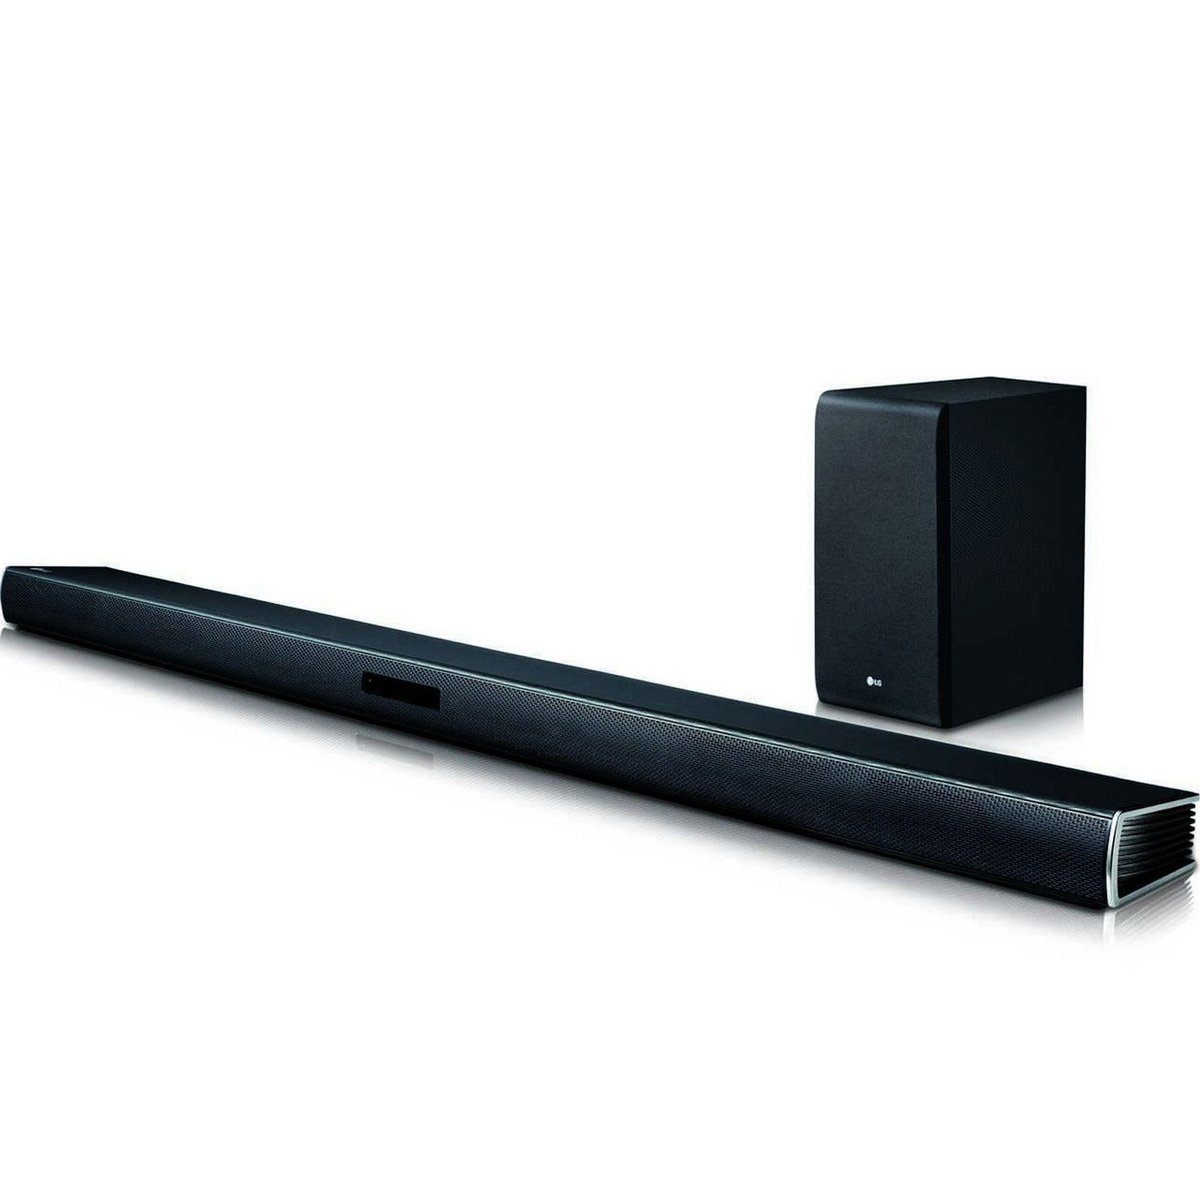 Embed Inaccessible coffee LG Soundbar 2.1 Channel SJ4 Online at Best Price | Home Theatre | Lulu UAE